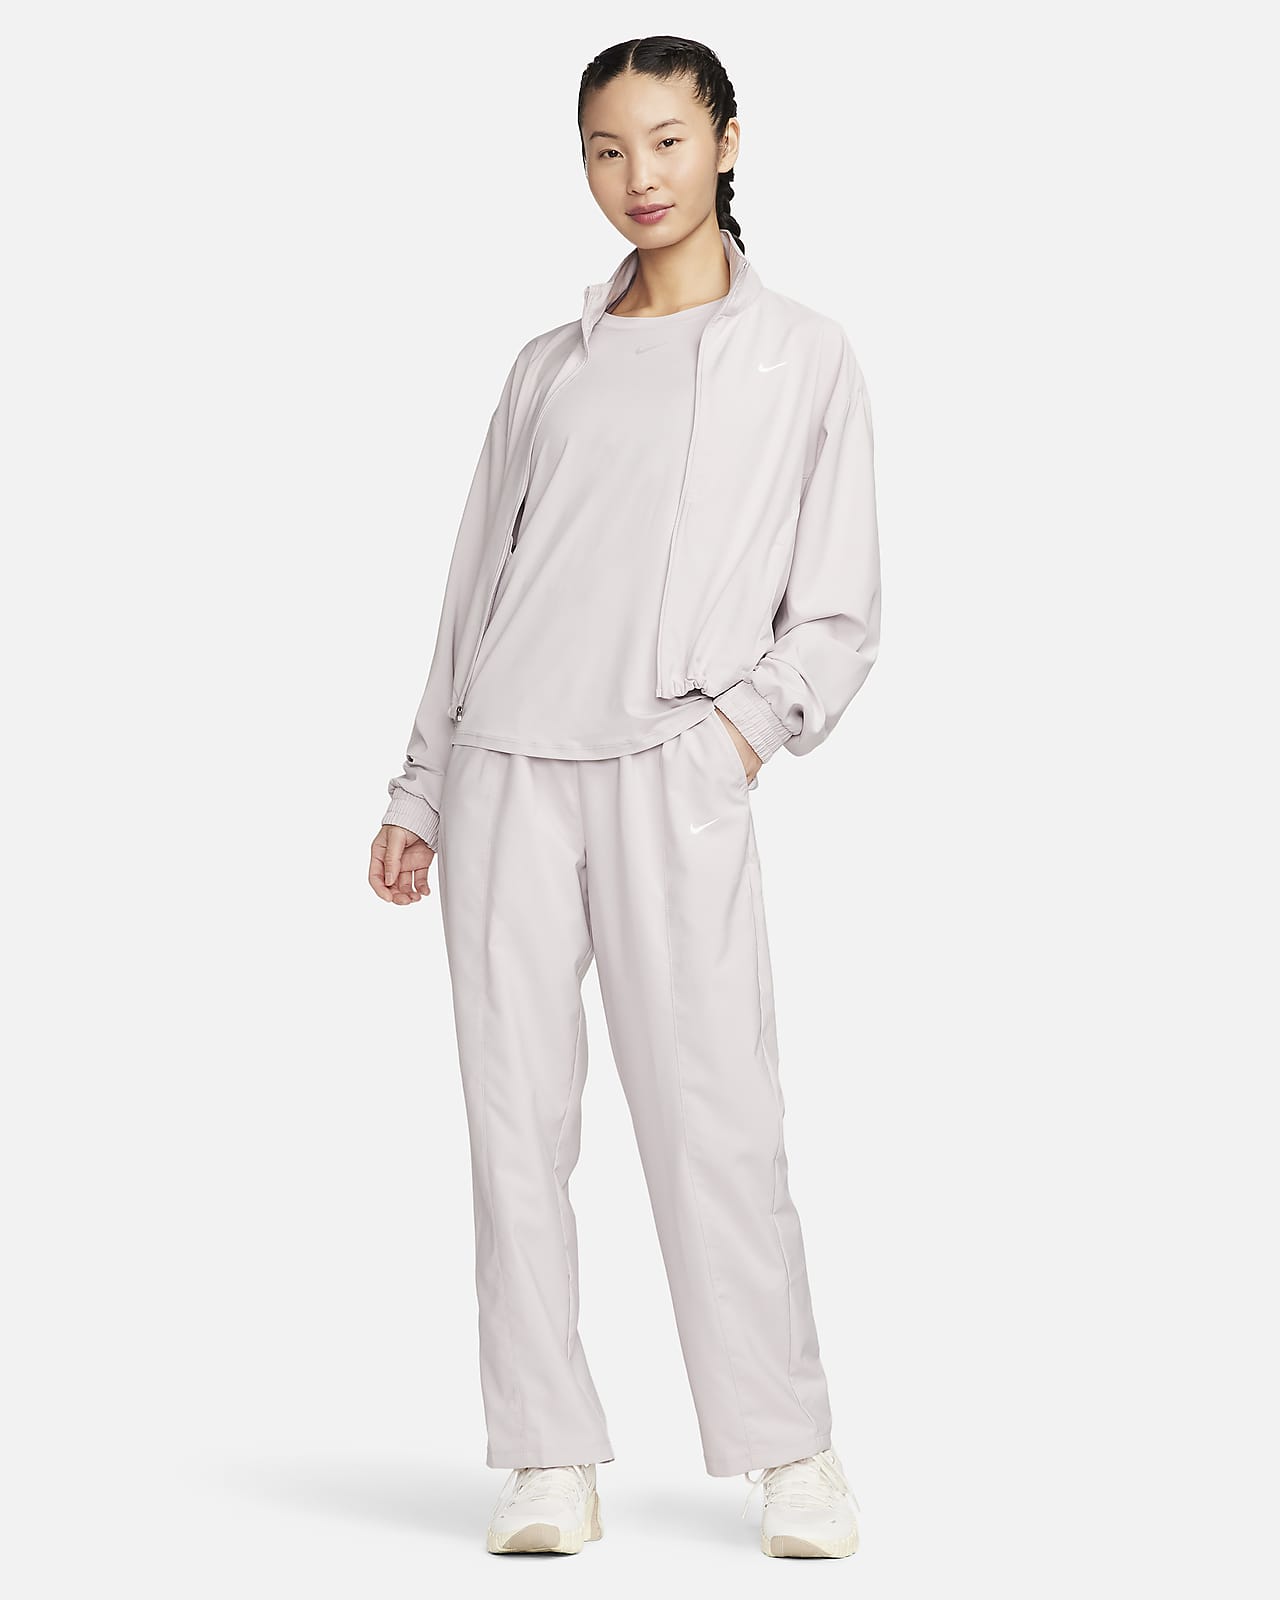 Women's White High Waisted Trousers | H&M IN-thunohoangphong.vn